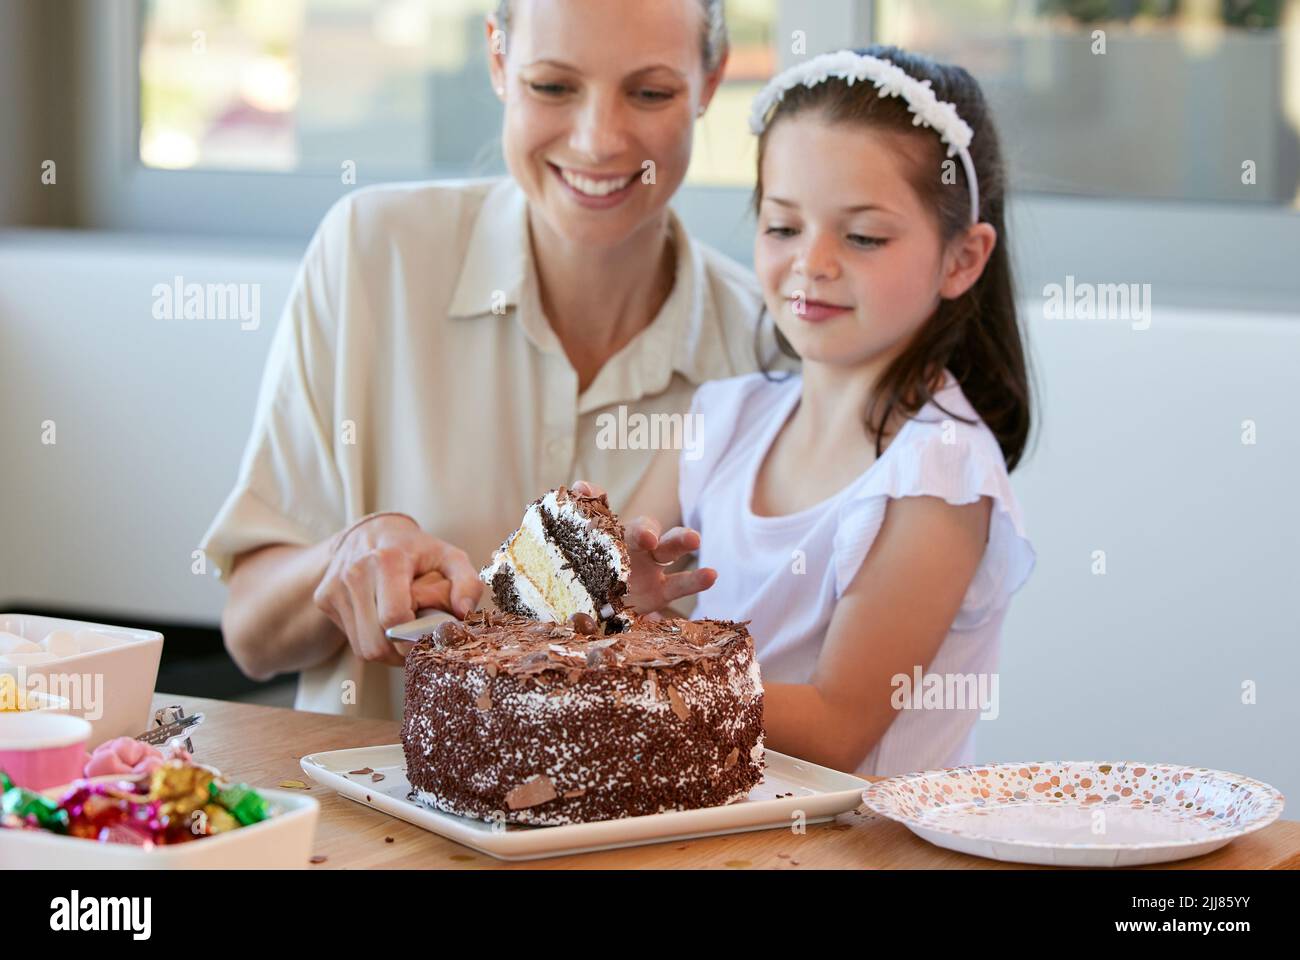 You get the first piece. a little girl celebrating her birthday at home. Stock Photo